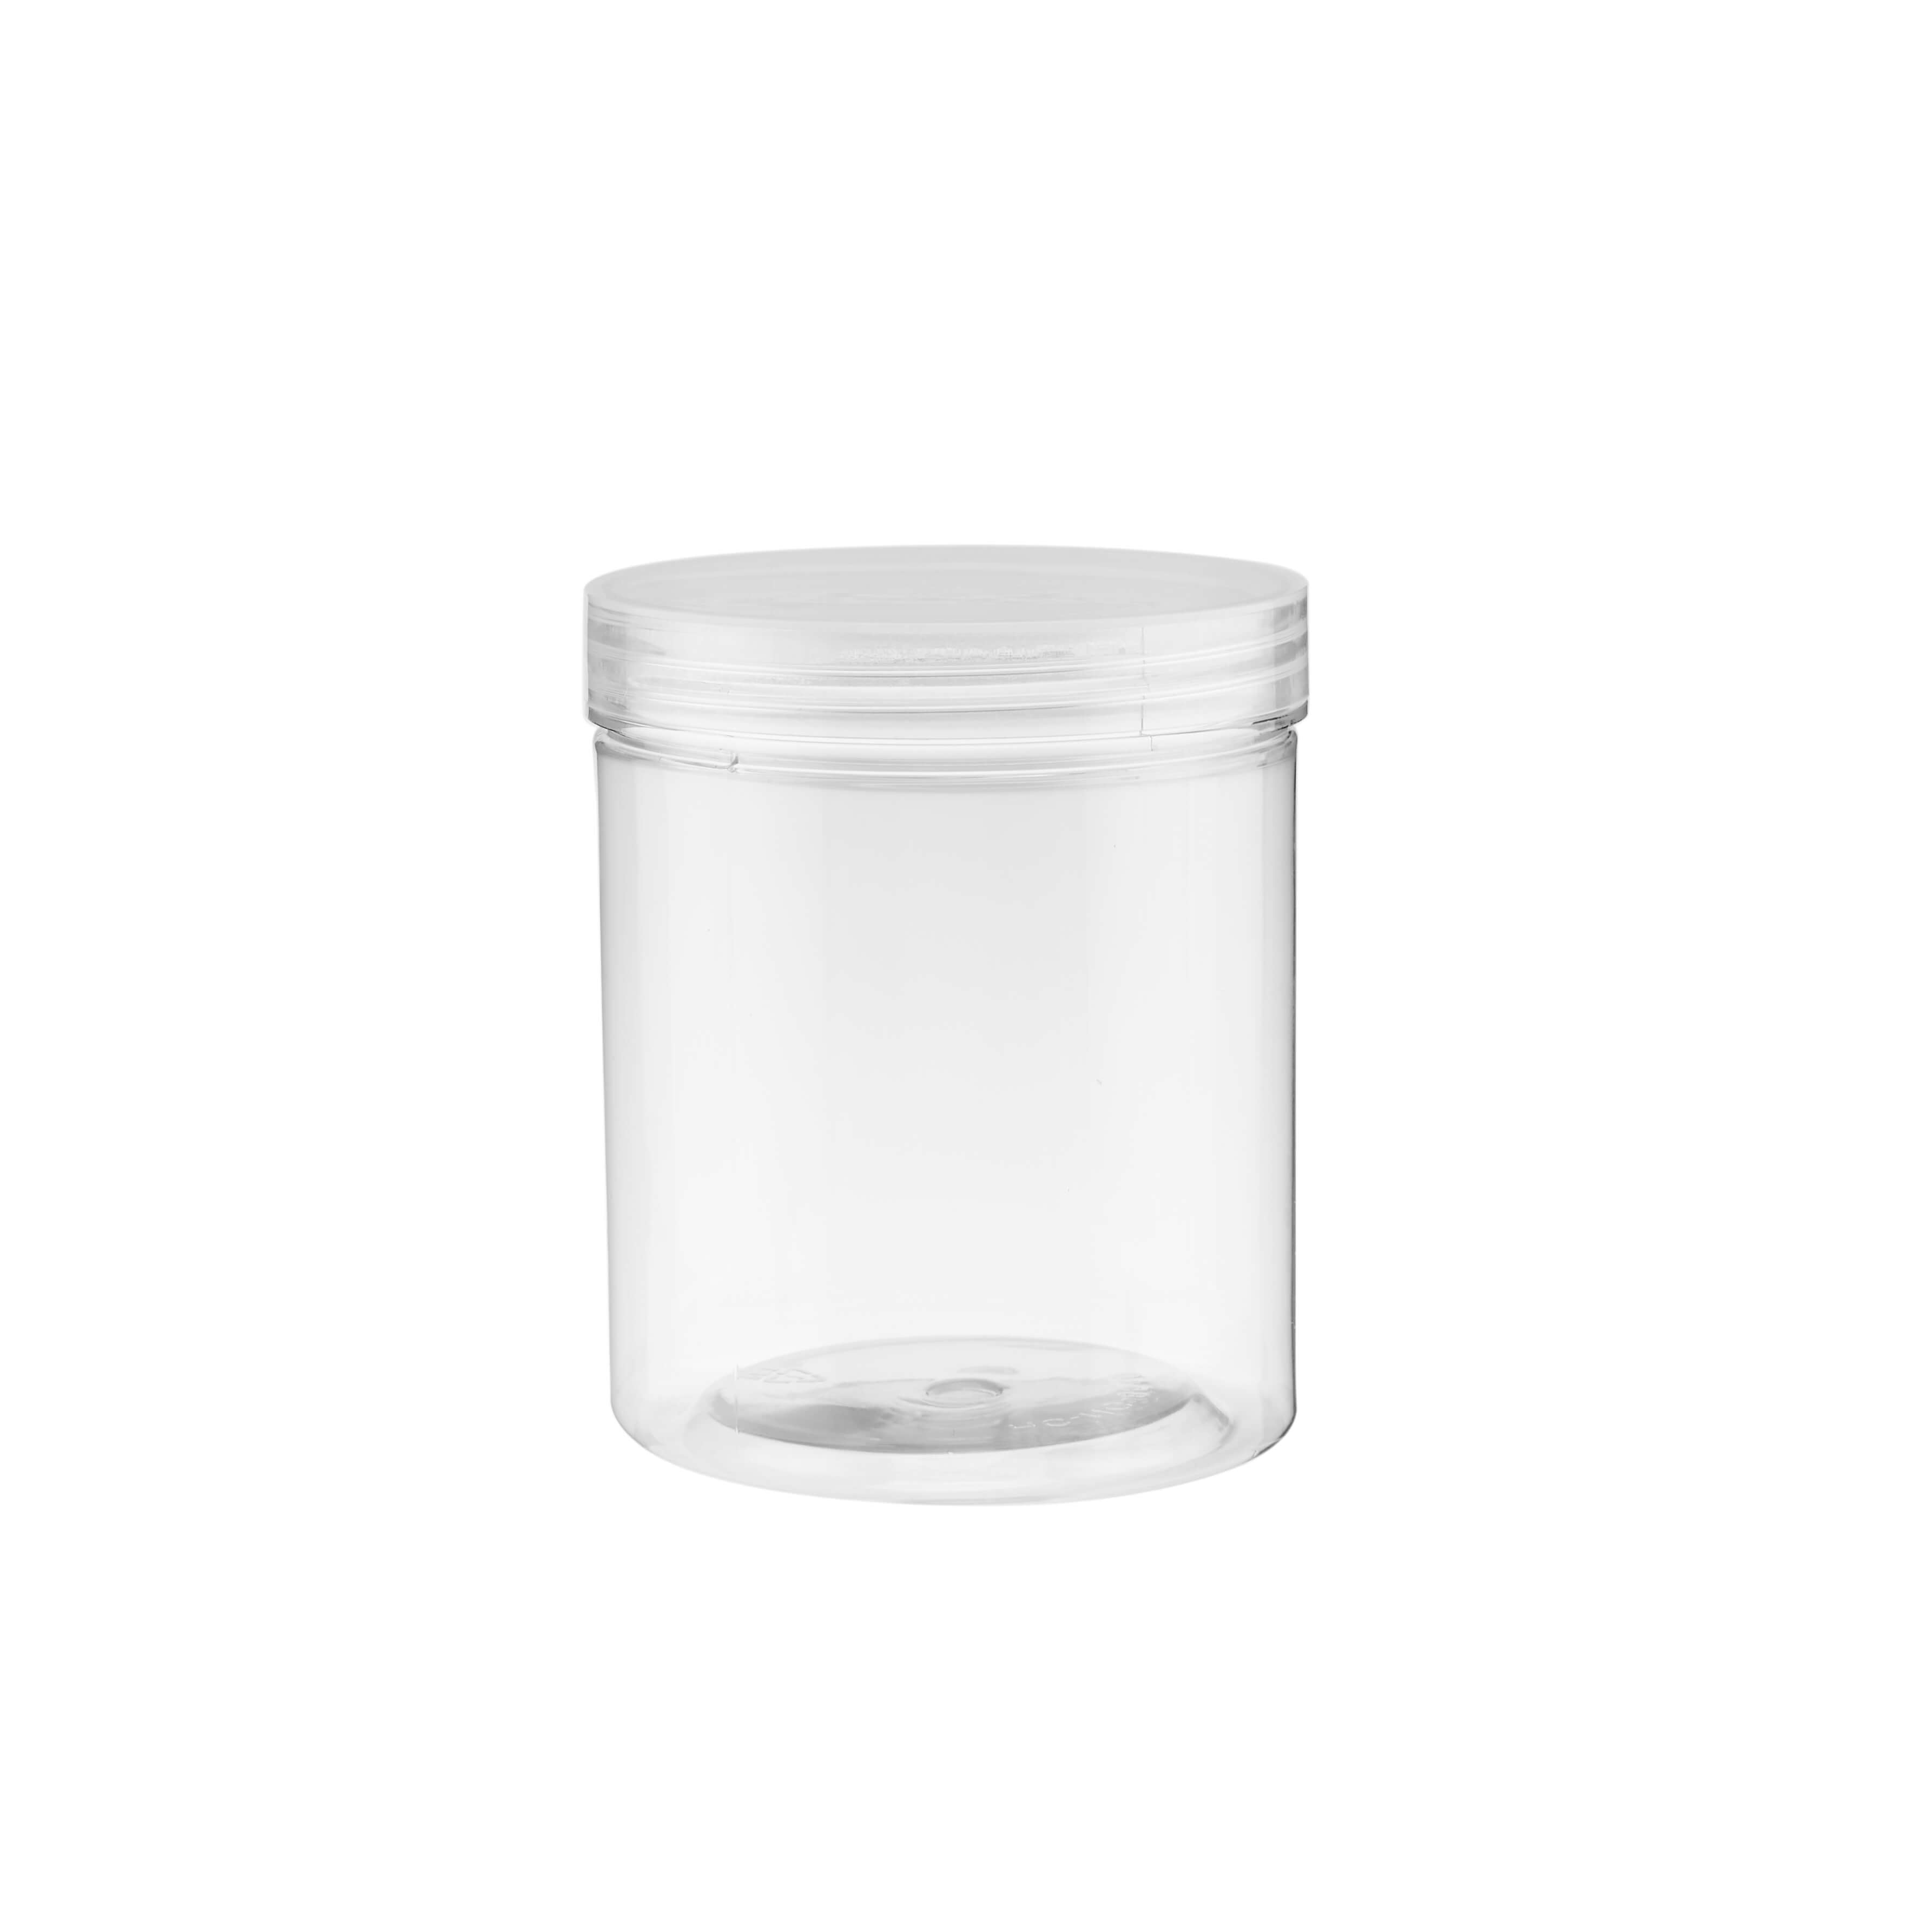 500ml Clear Plastic Jar with Lid for organization - Hotpack Global